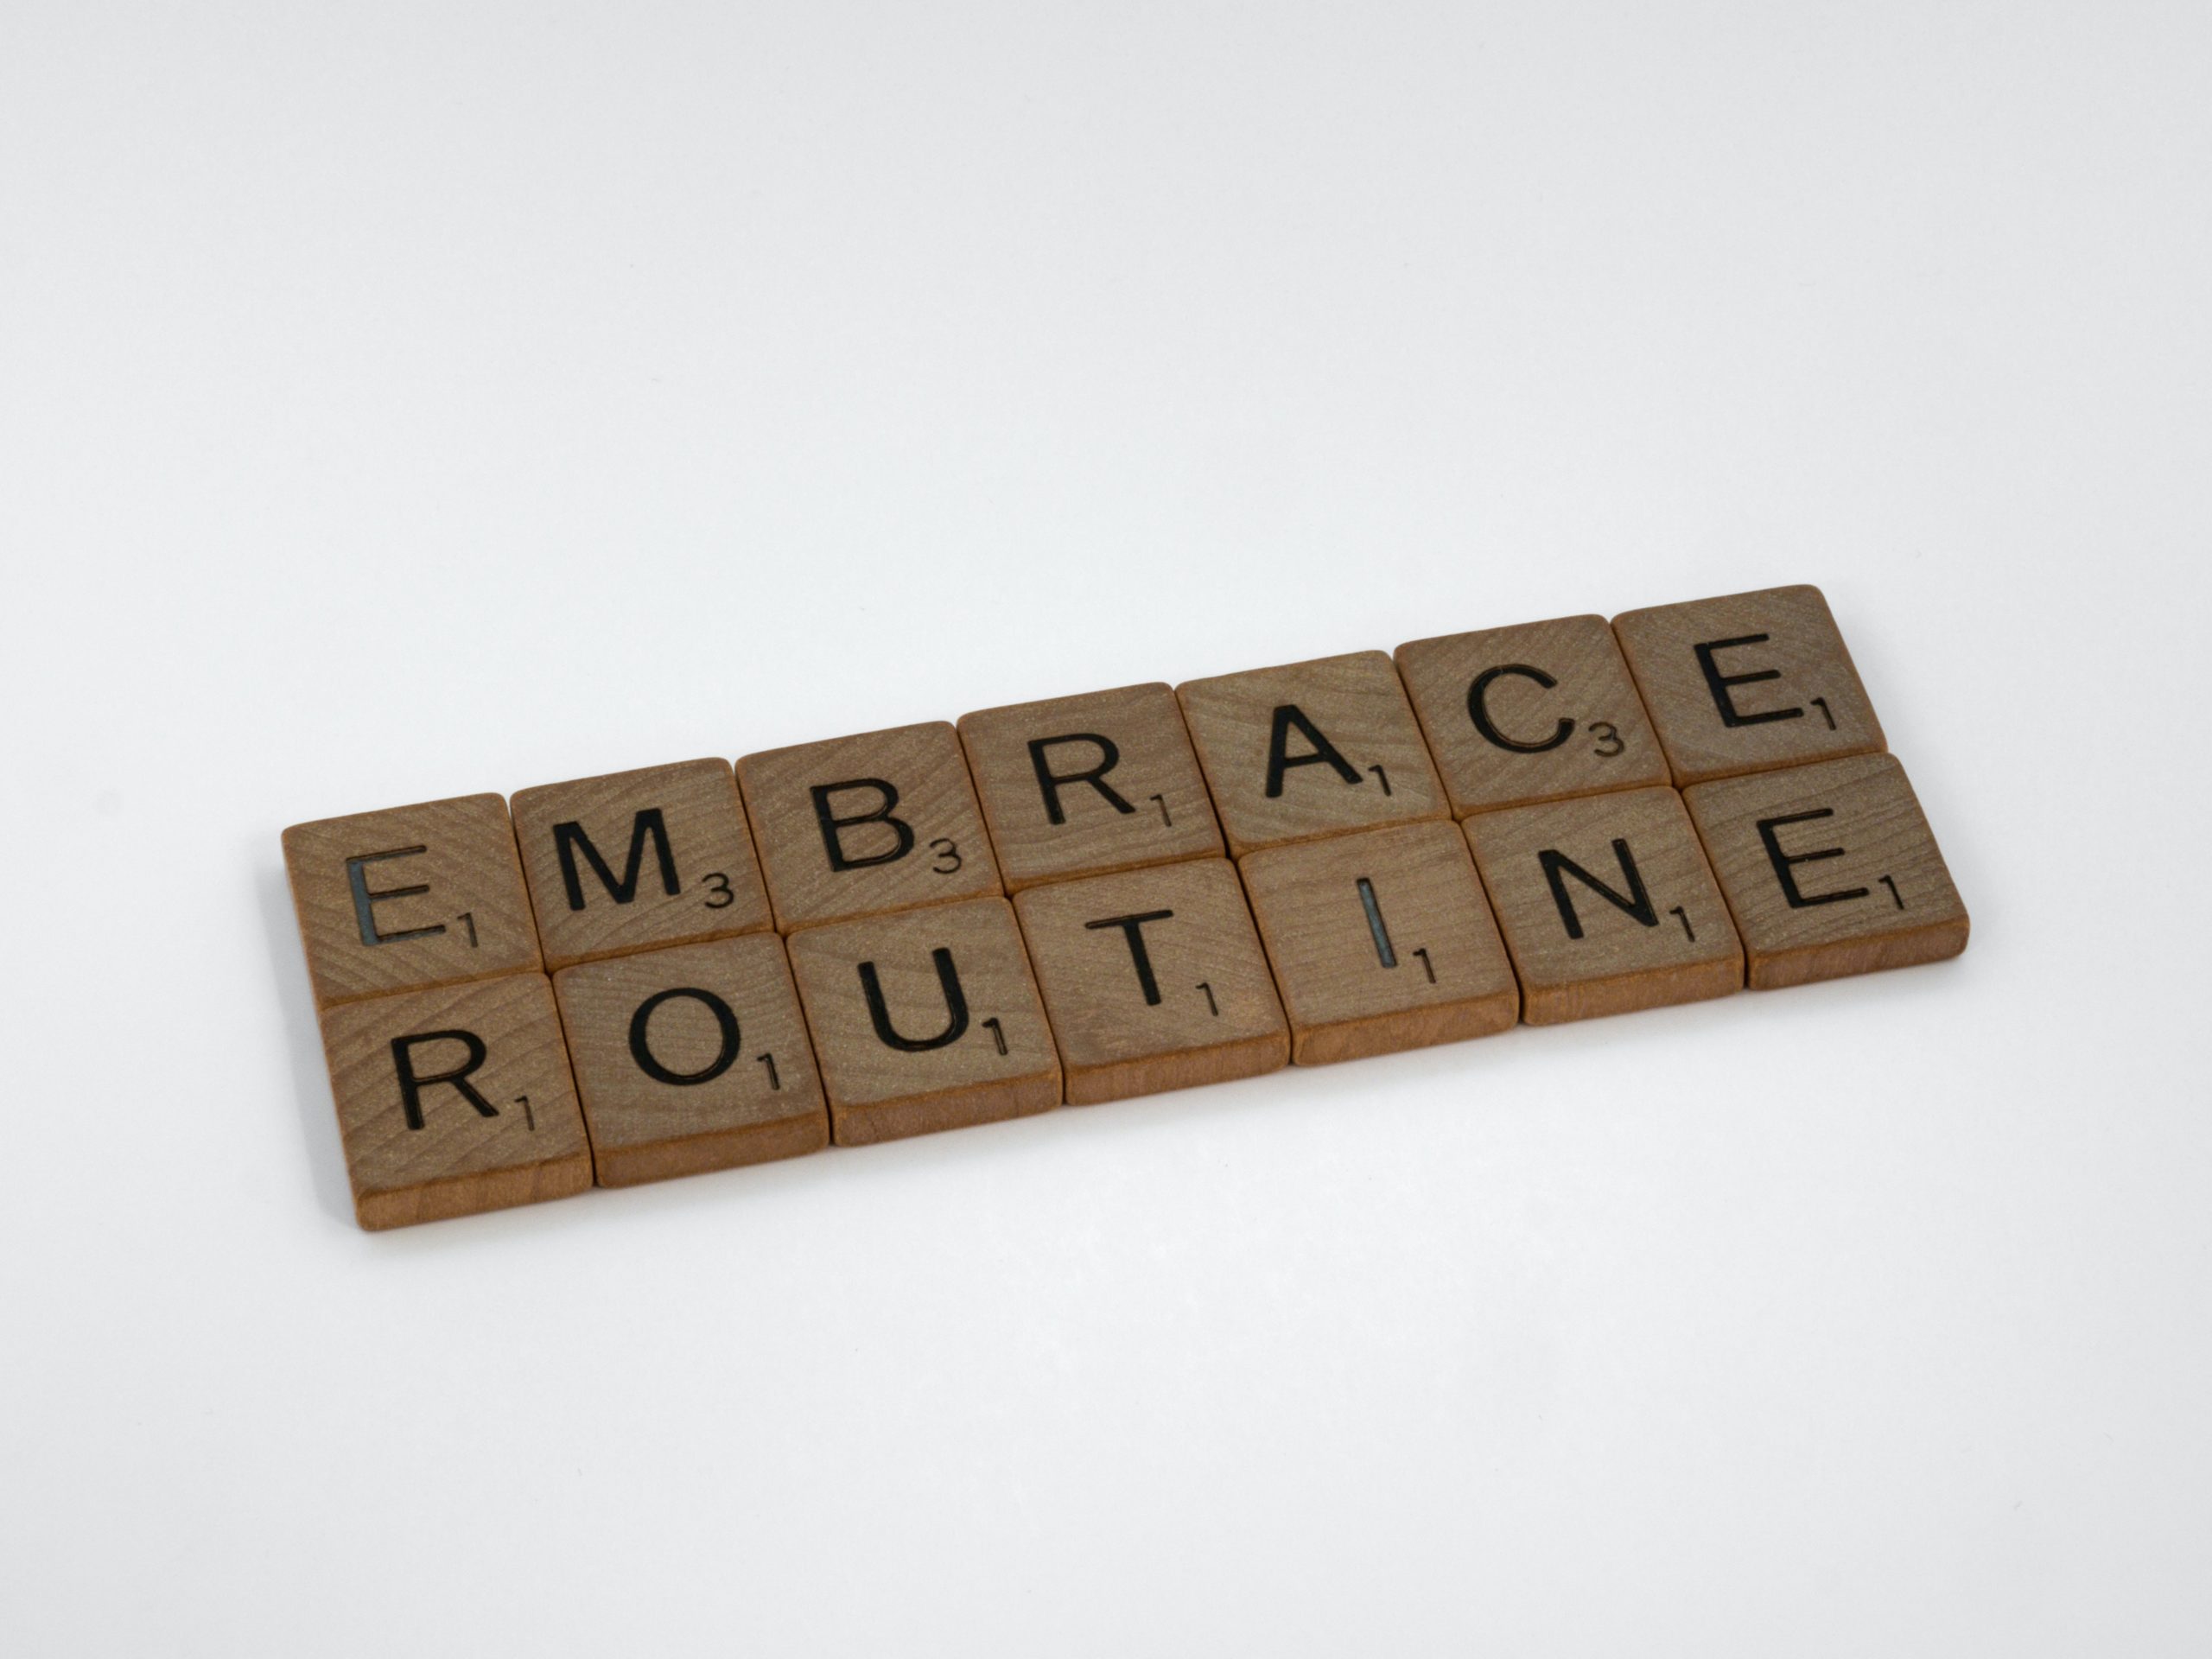 Some wooden Scrabble tiles spell out, "EMBRACE ROUTINE."